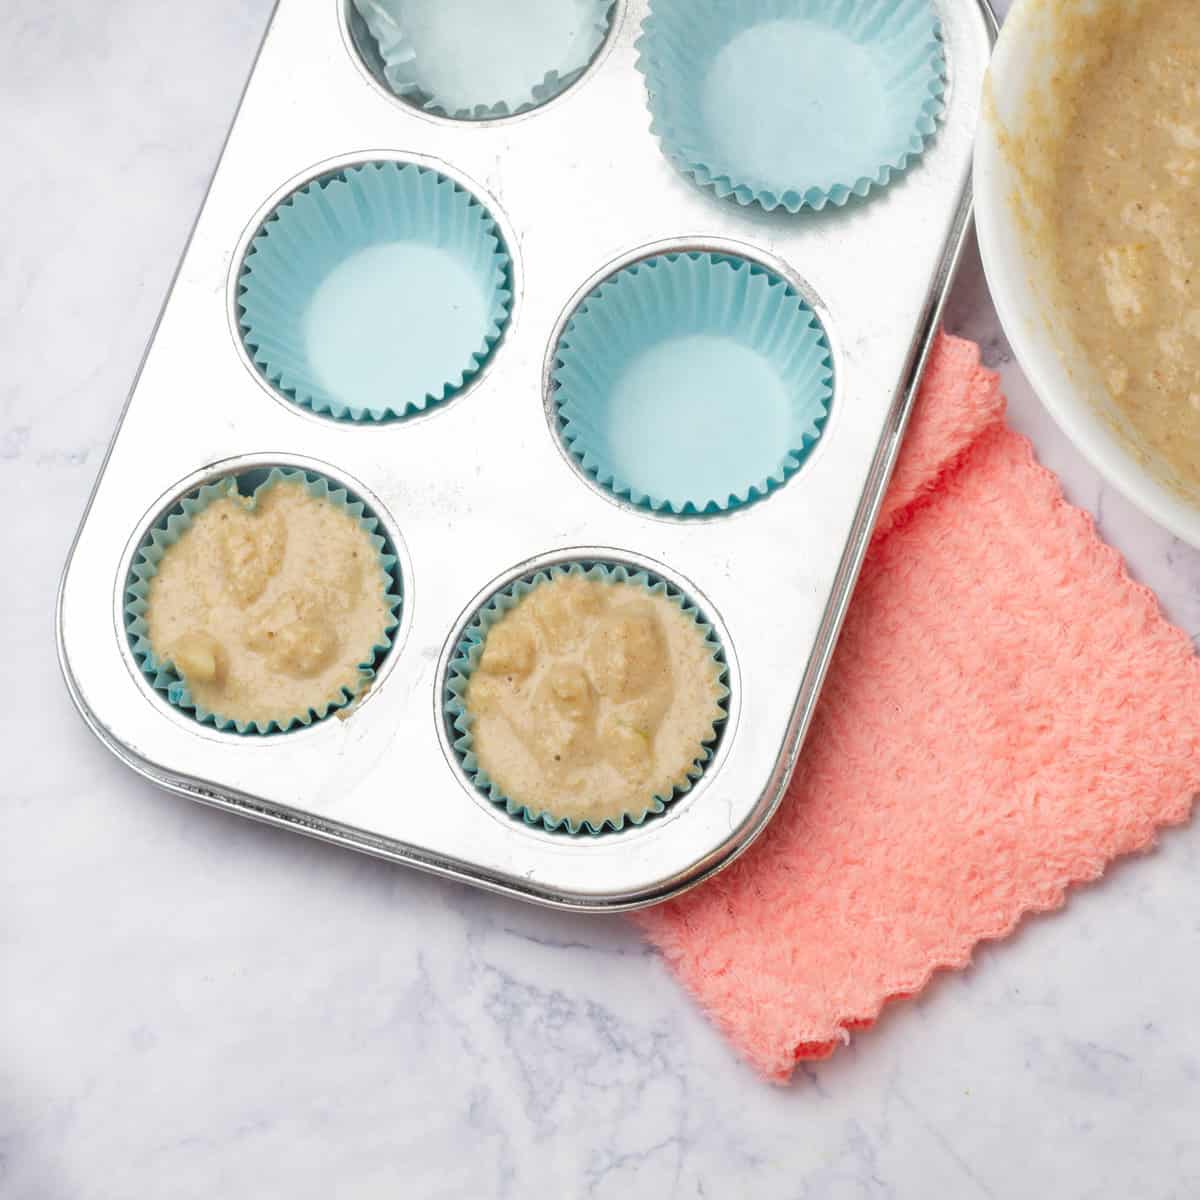 Apple muffin batter in lined muffin tins, ready to bake.